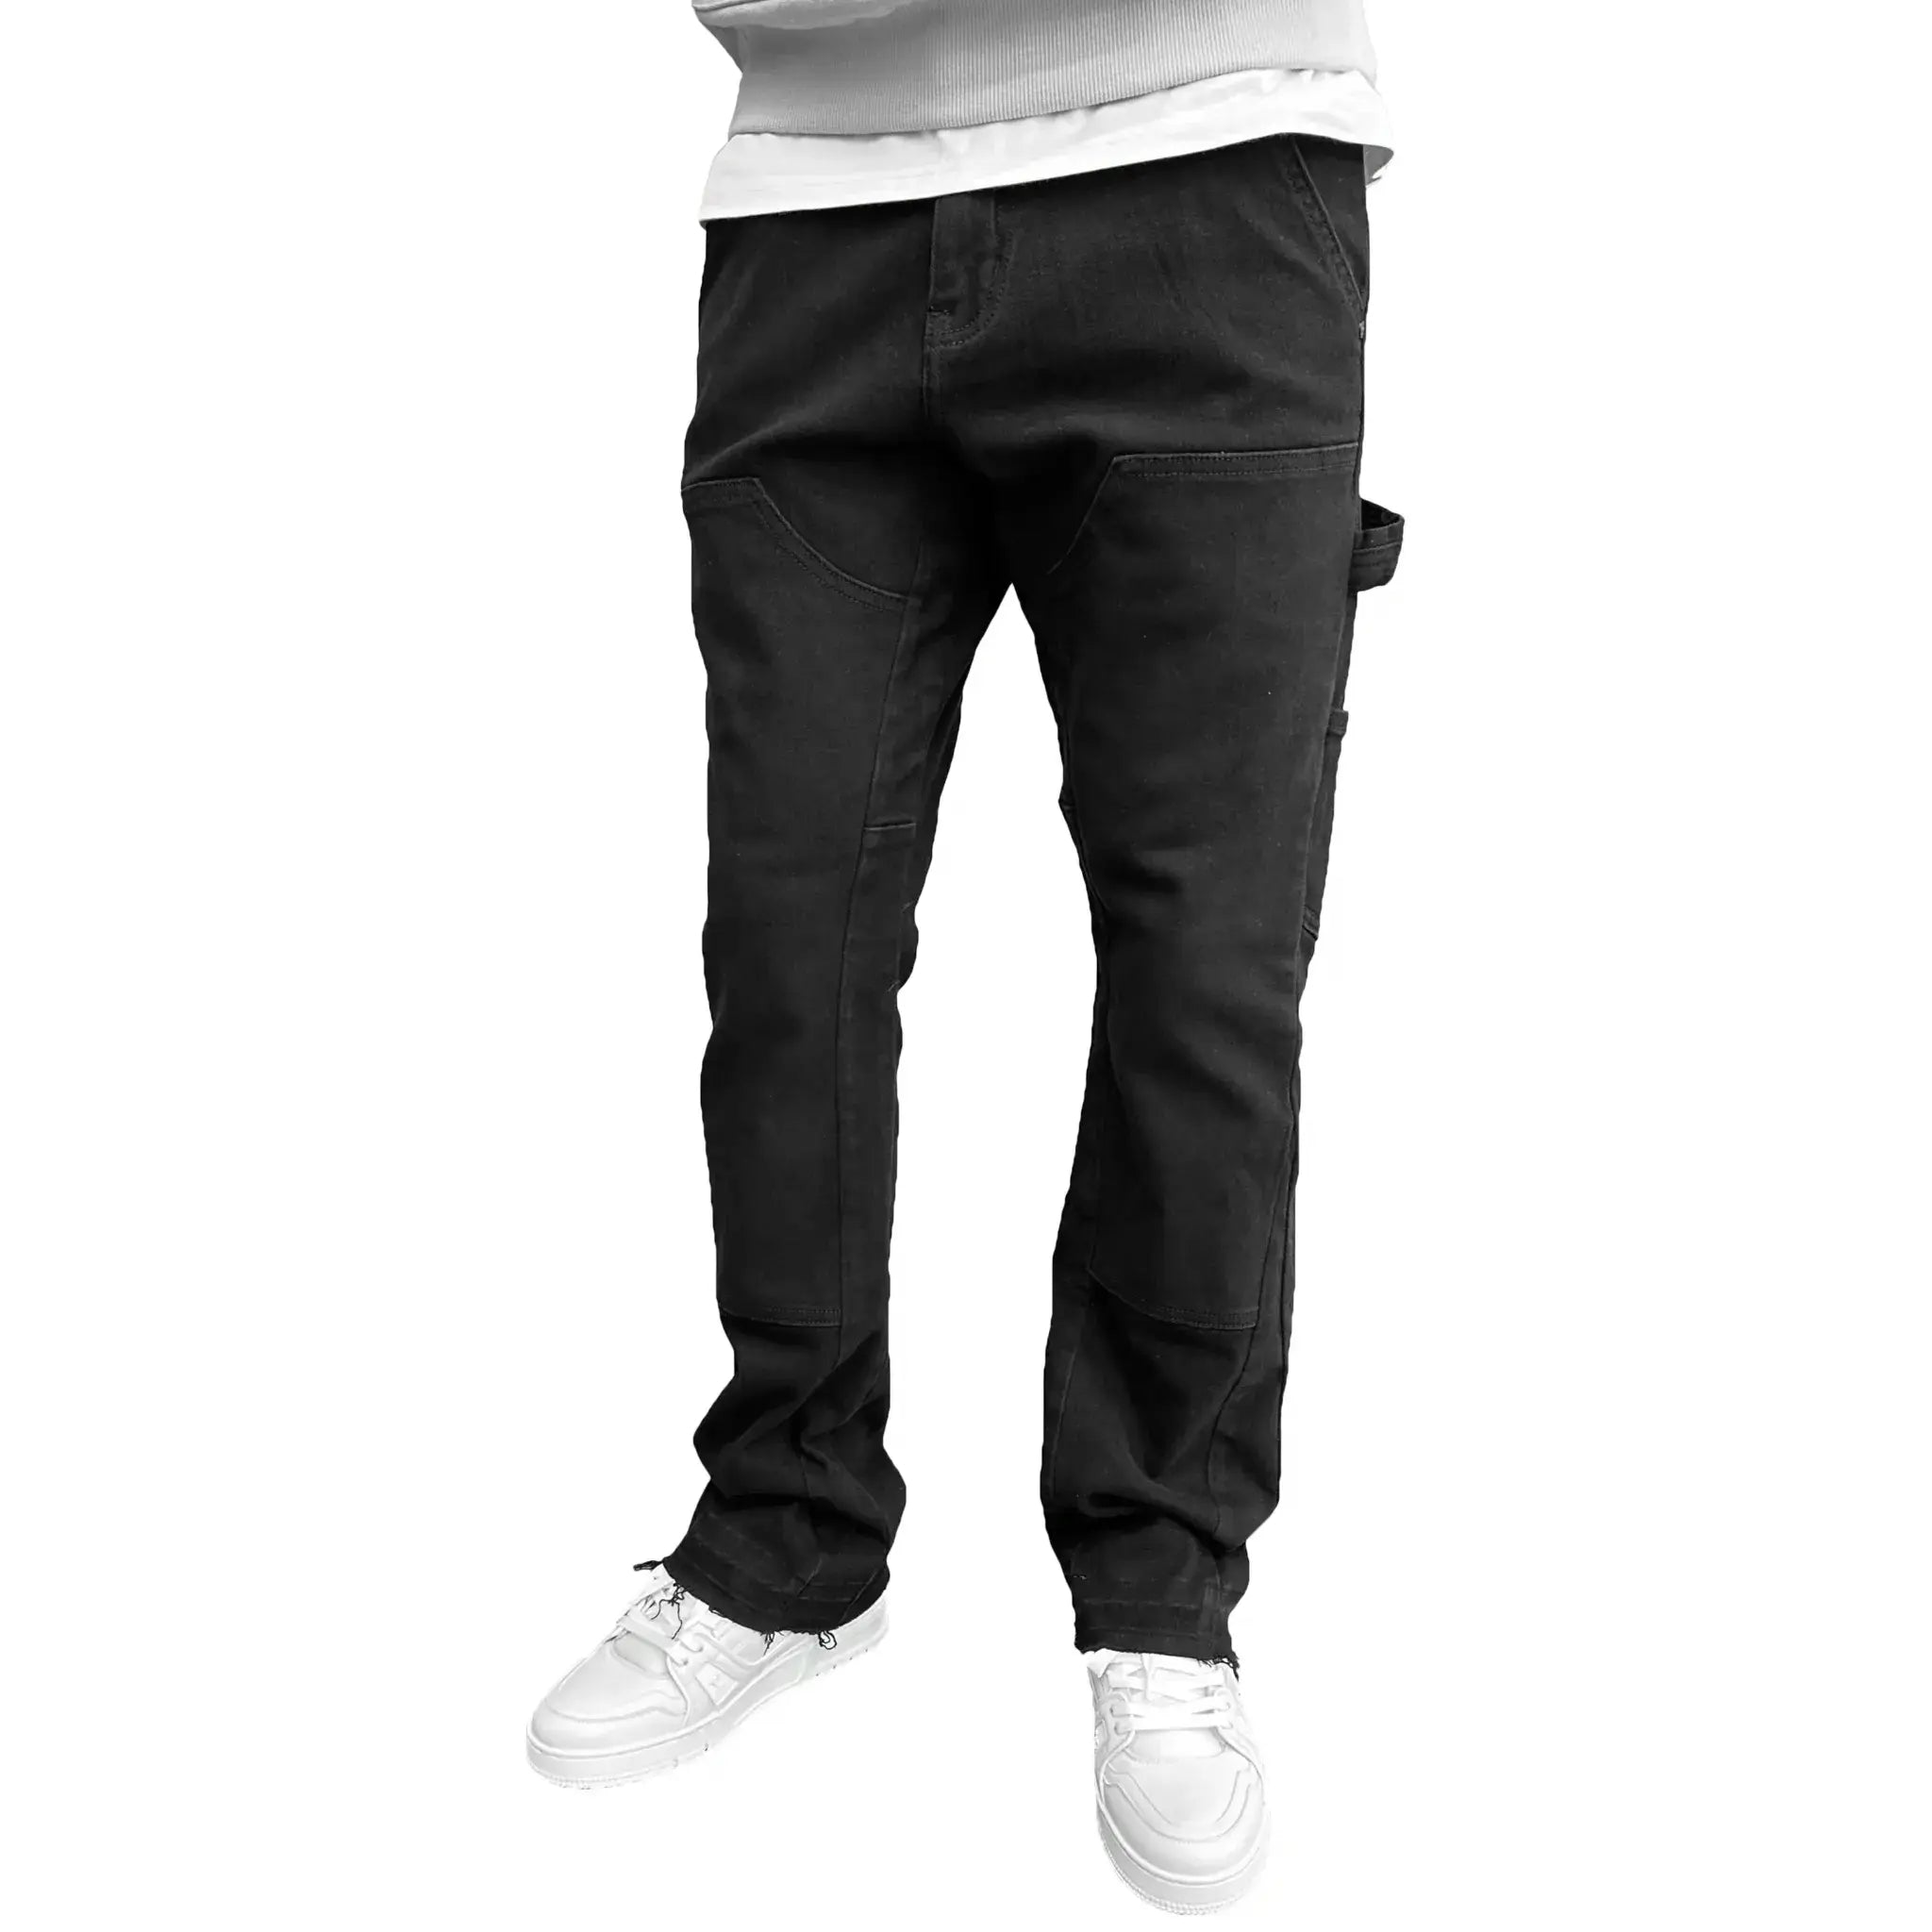 Model front view of SBLUP01293 006000 Chino pants